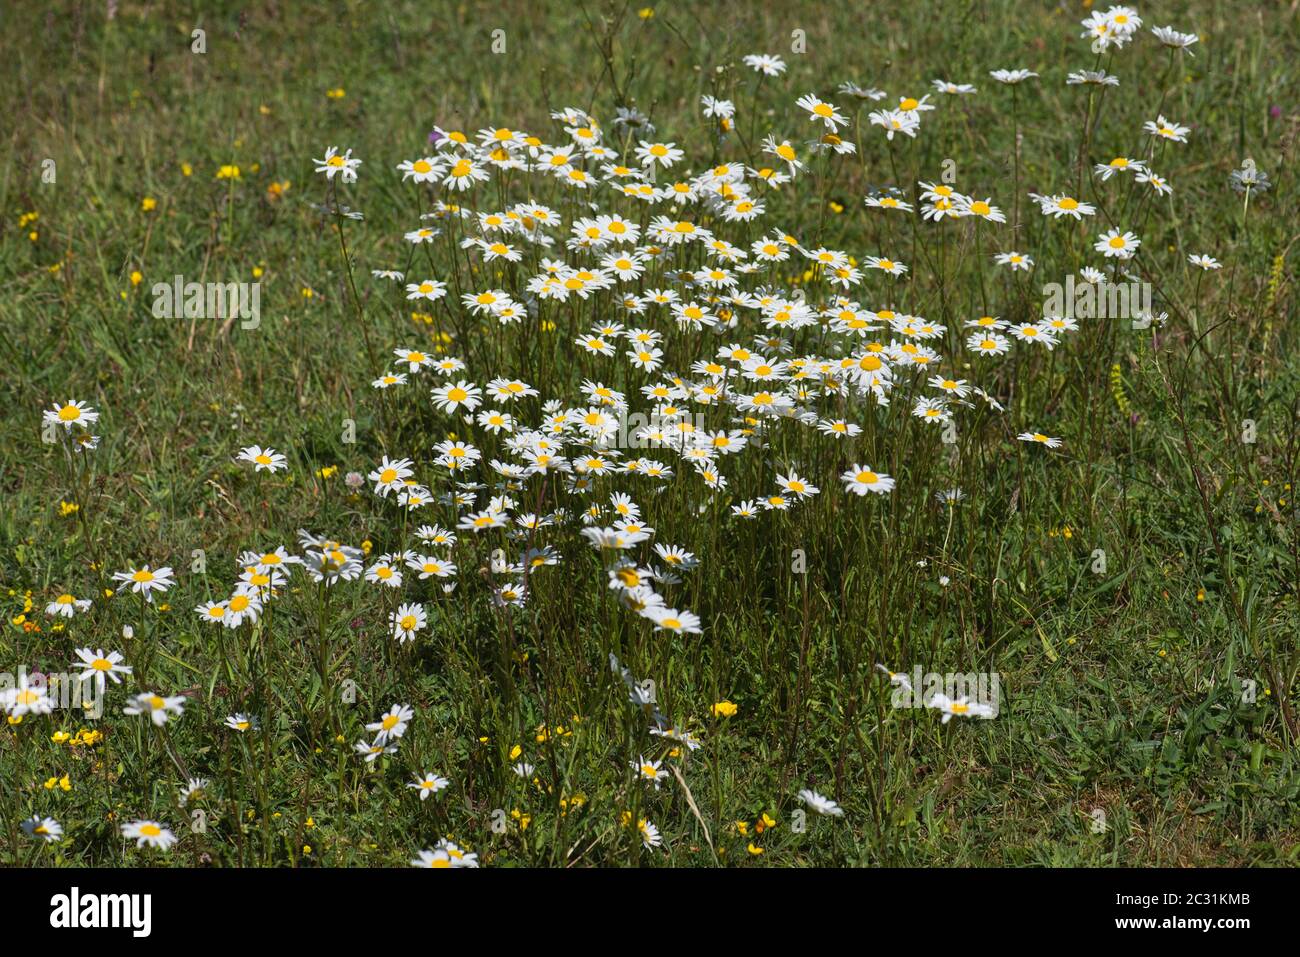 A small clump of ox-eye daisies (Leucanthemum vulgare), a common roadside plant in the UK and elsewhere. Stock Photo